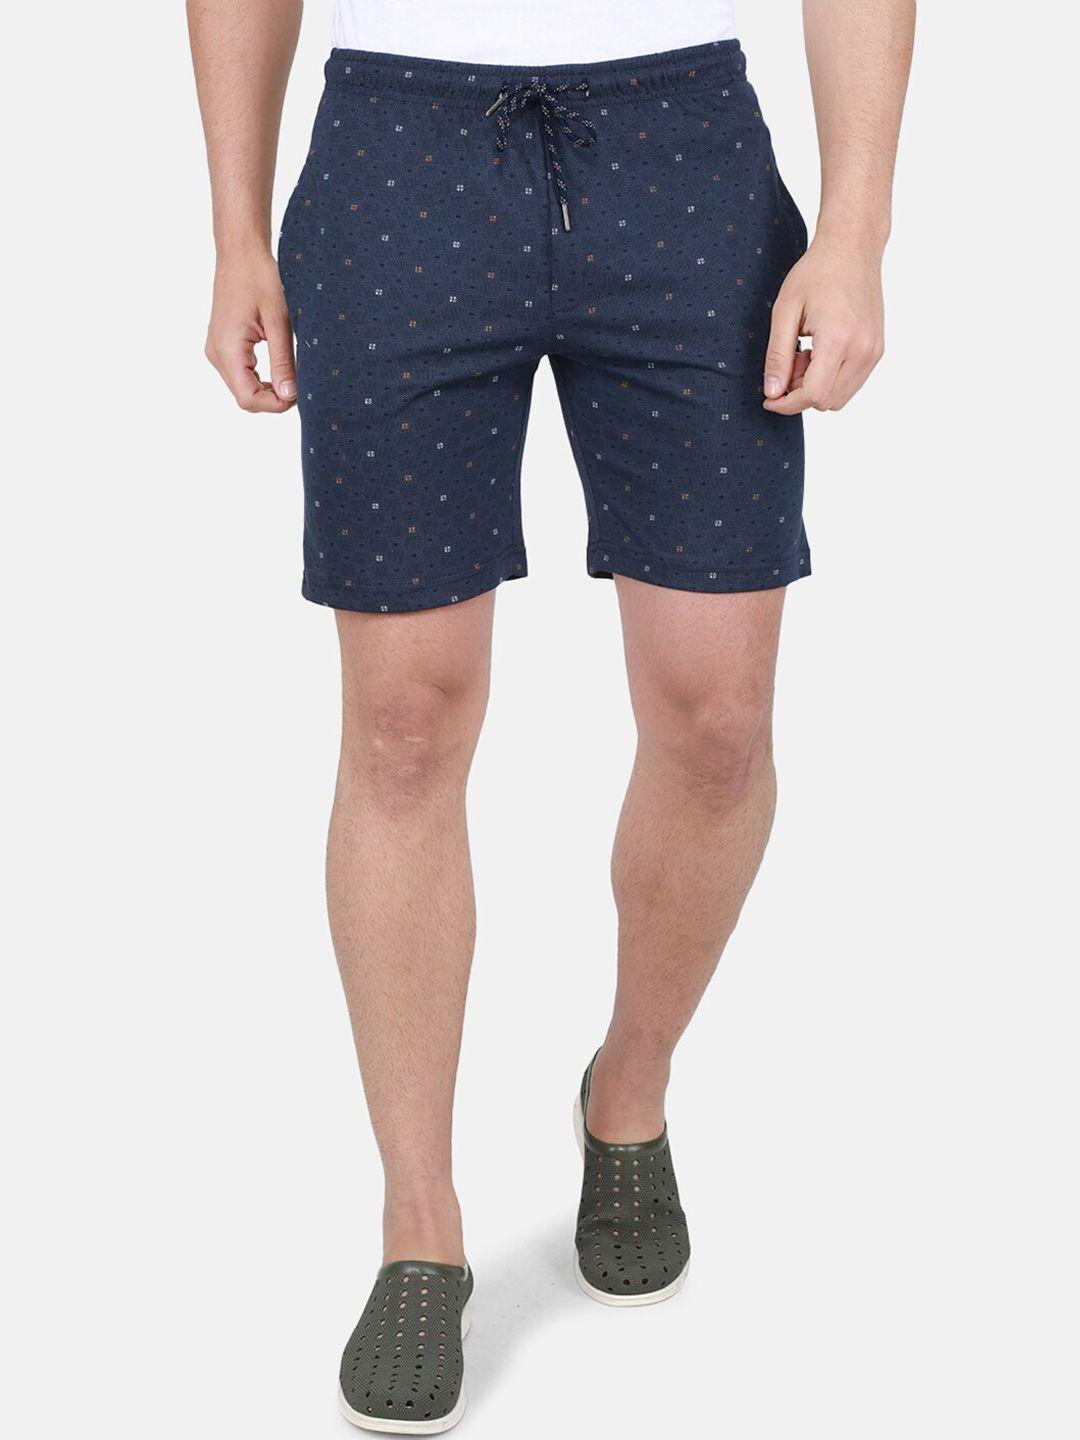 monte-carlo-men-conversational-printed-mid-rise-knitted-shorts